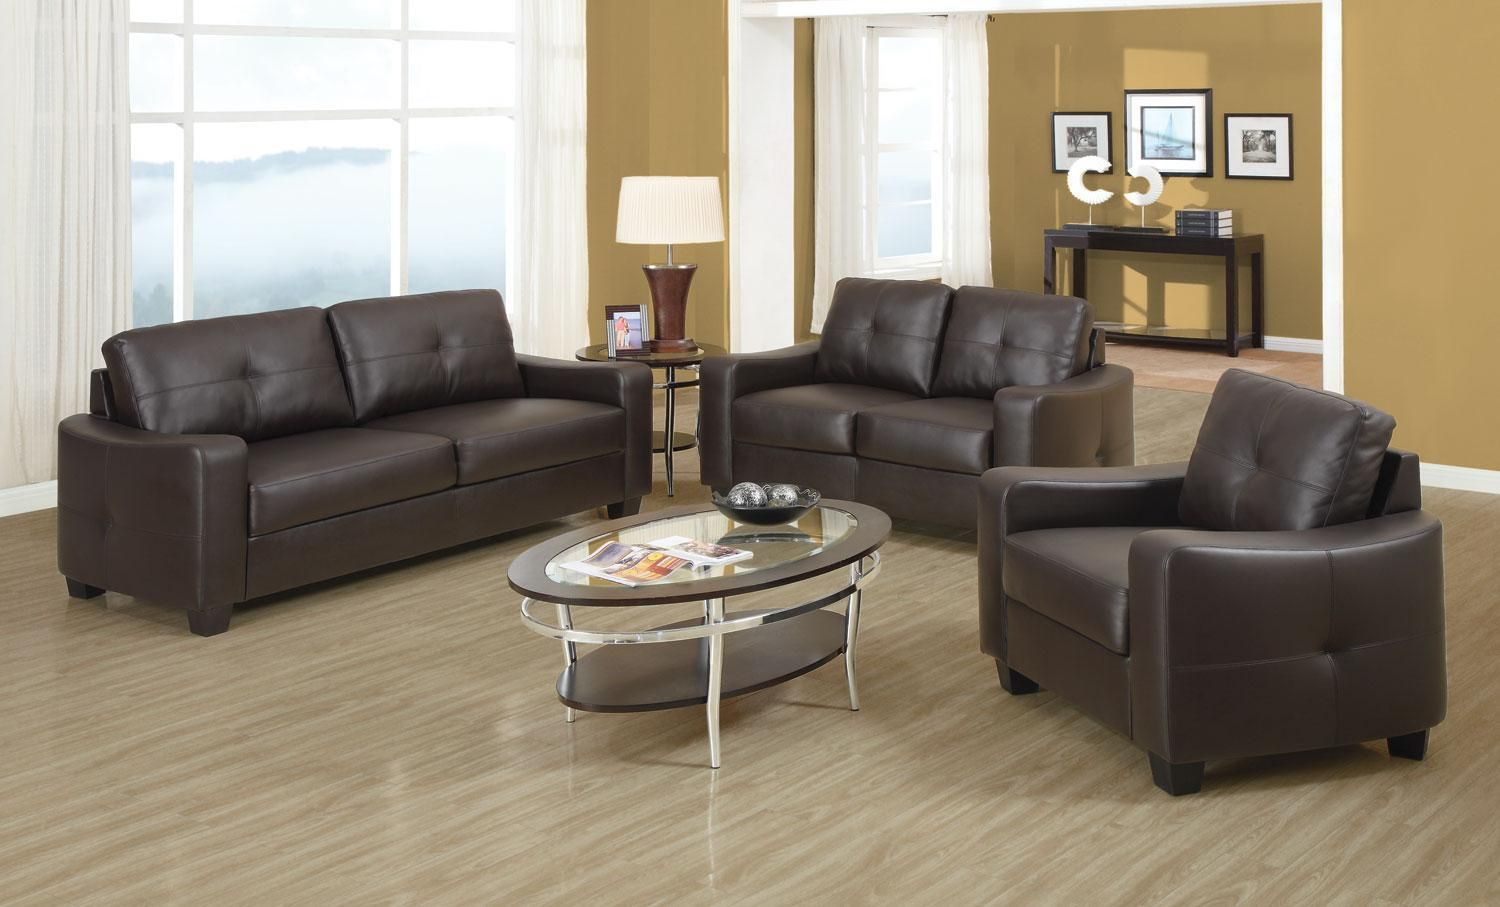 Coaster Jasmine Brown Sofa 502731 | Comfyco Intended For Faux Leather Sofas In Chocolate Brown (View 11 of 15)